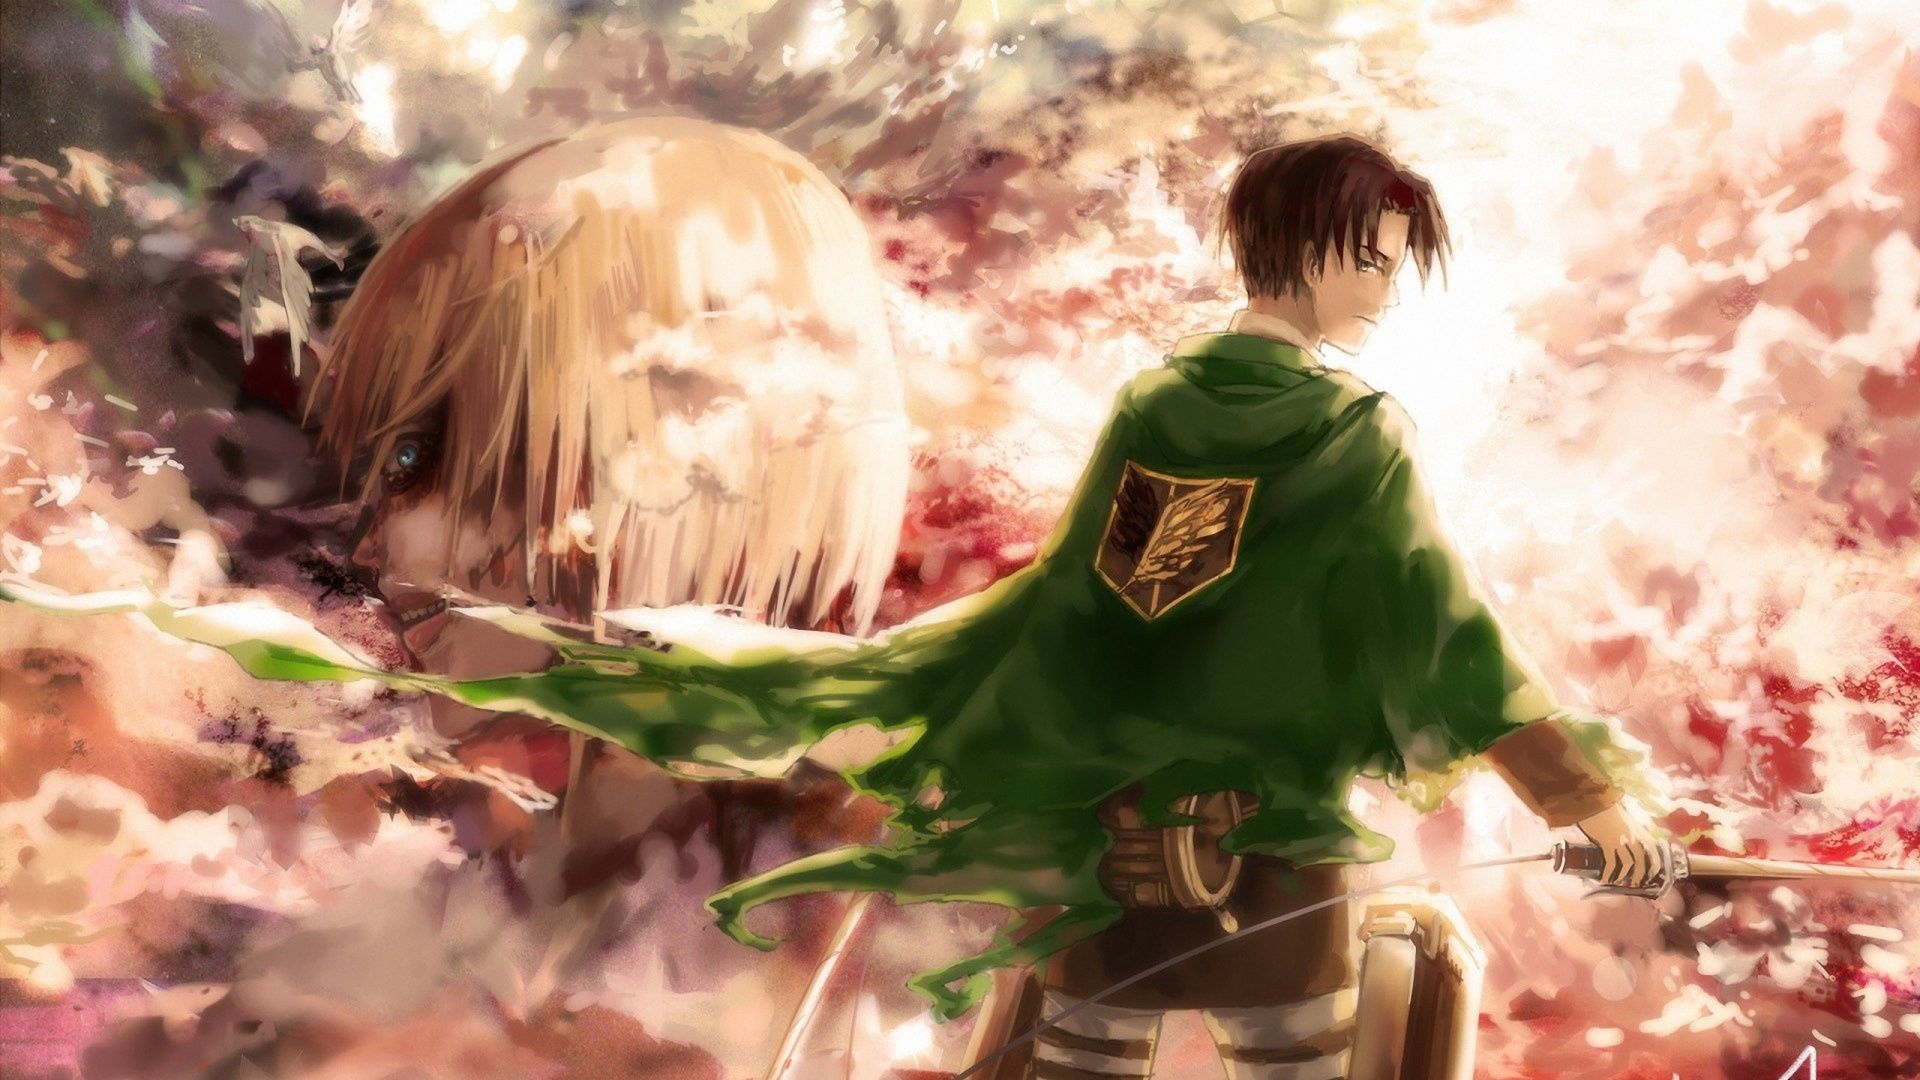 Of Wallpapers Images Anime Attack On Titan Levi